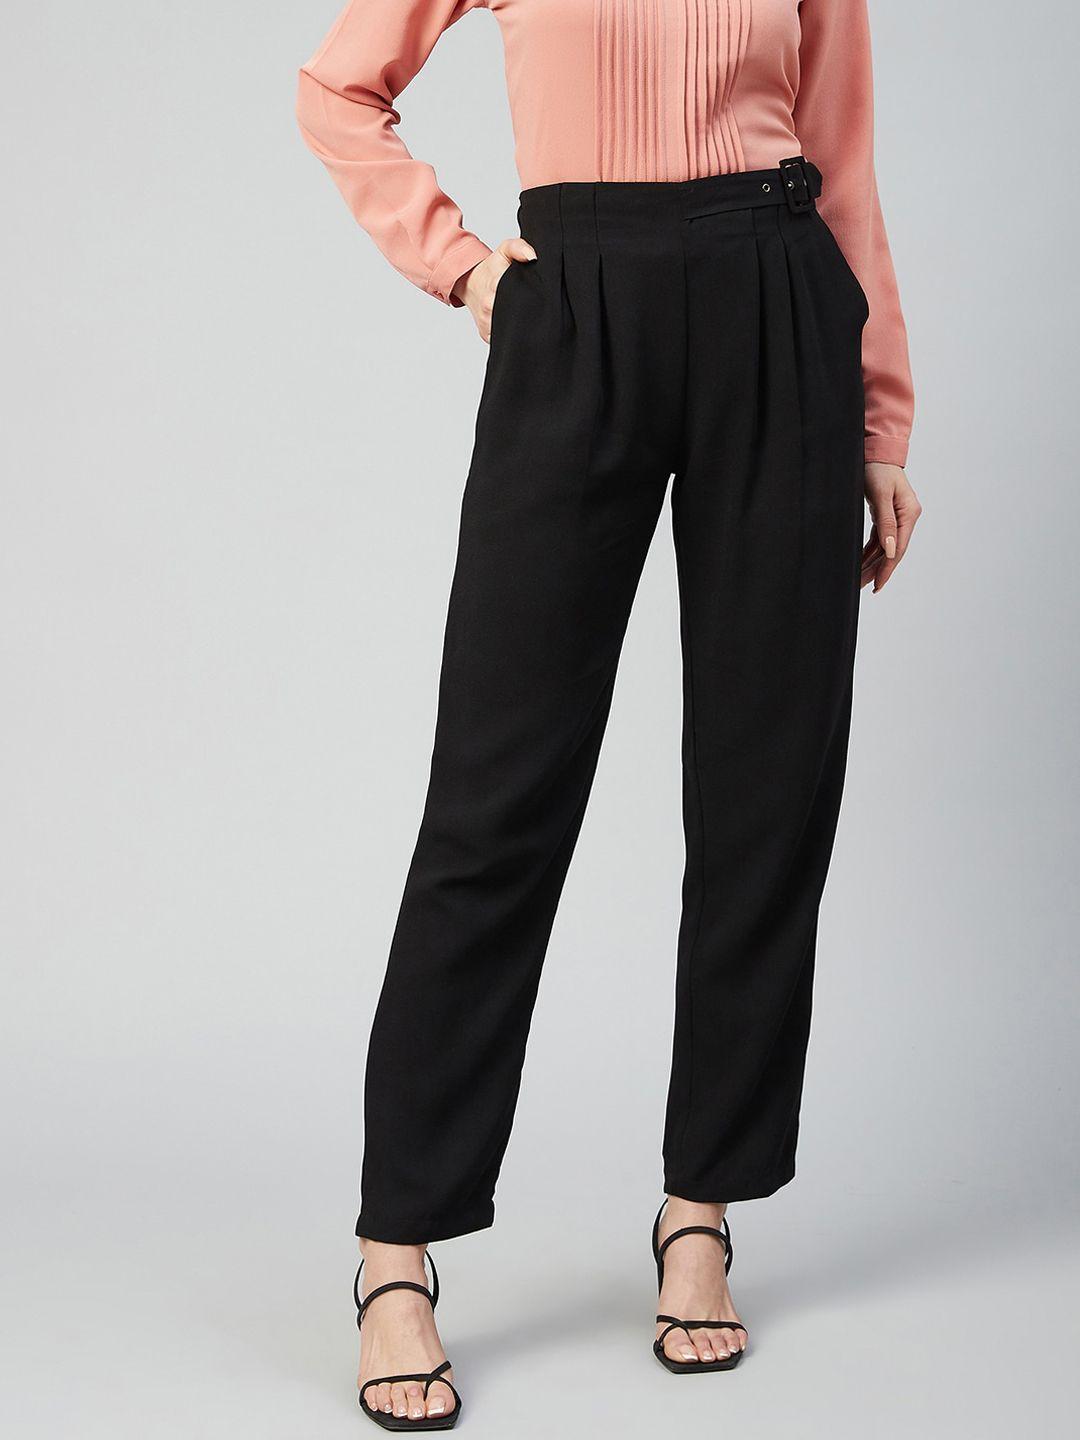 marie-claire-women-black-solid-pleated-trousers-with-belt-buckle-applique